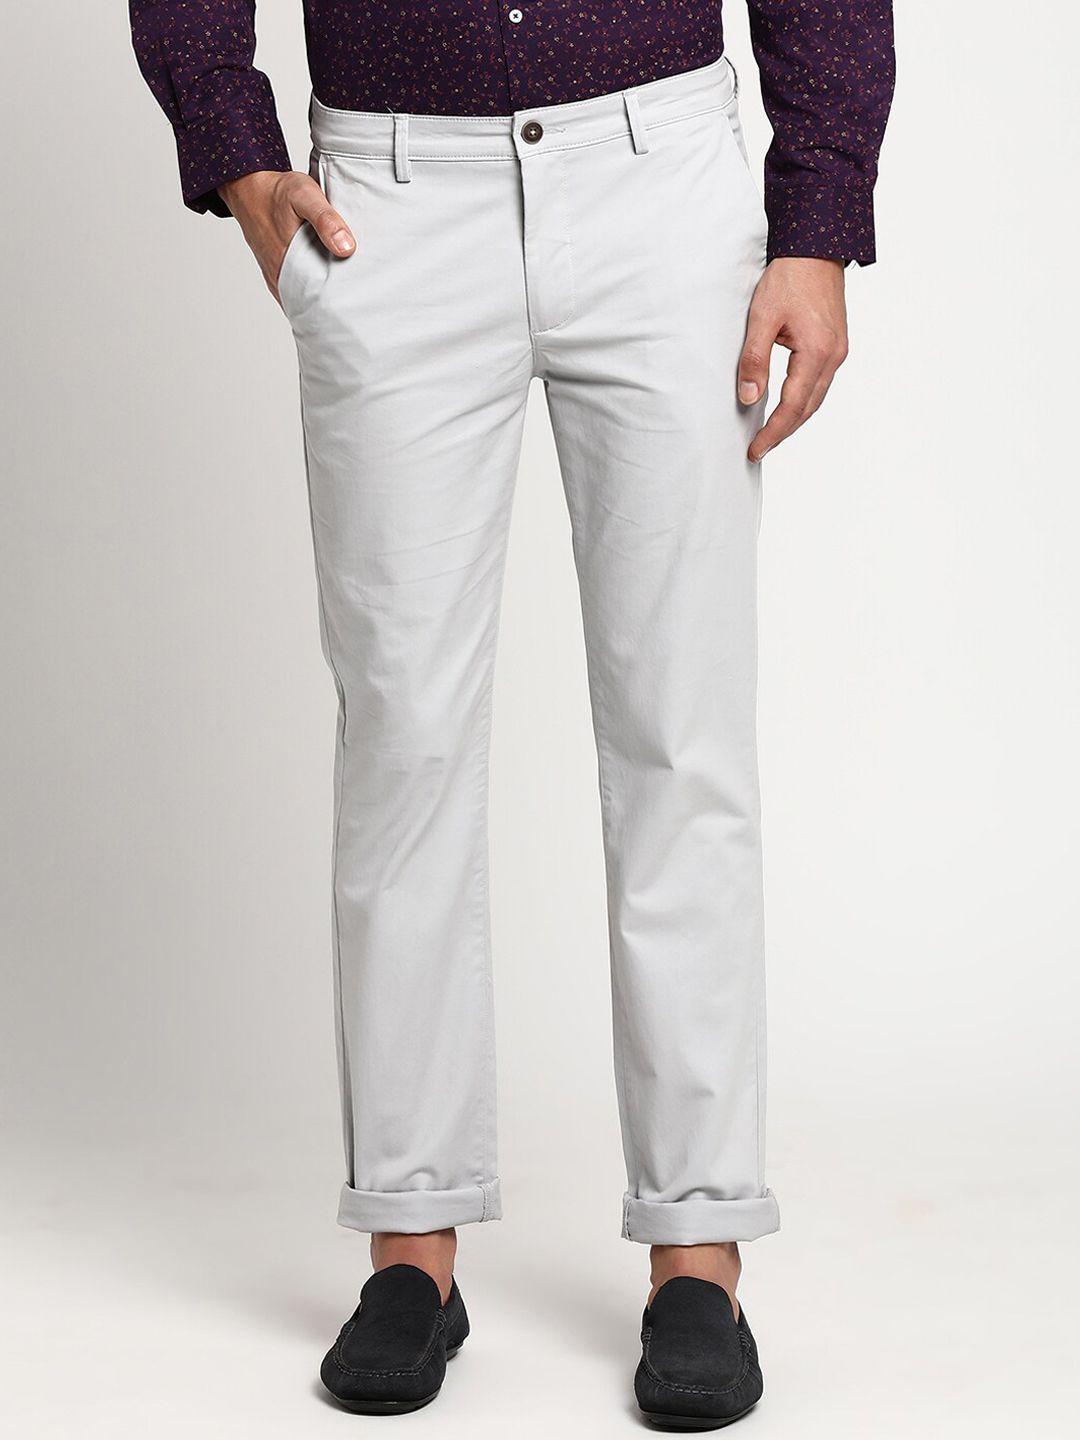 turtle men off white slim fit chinos trousers